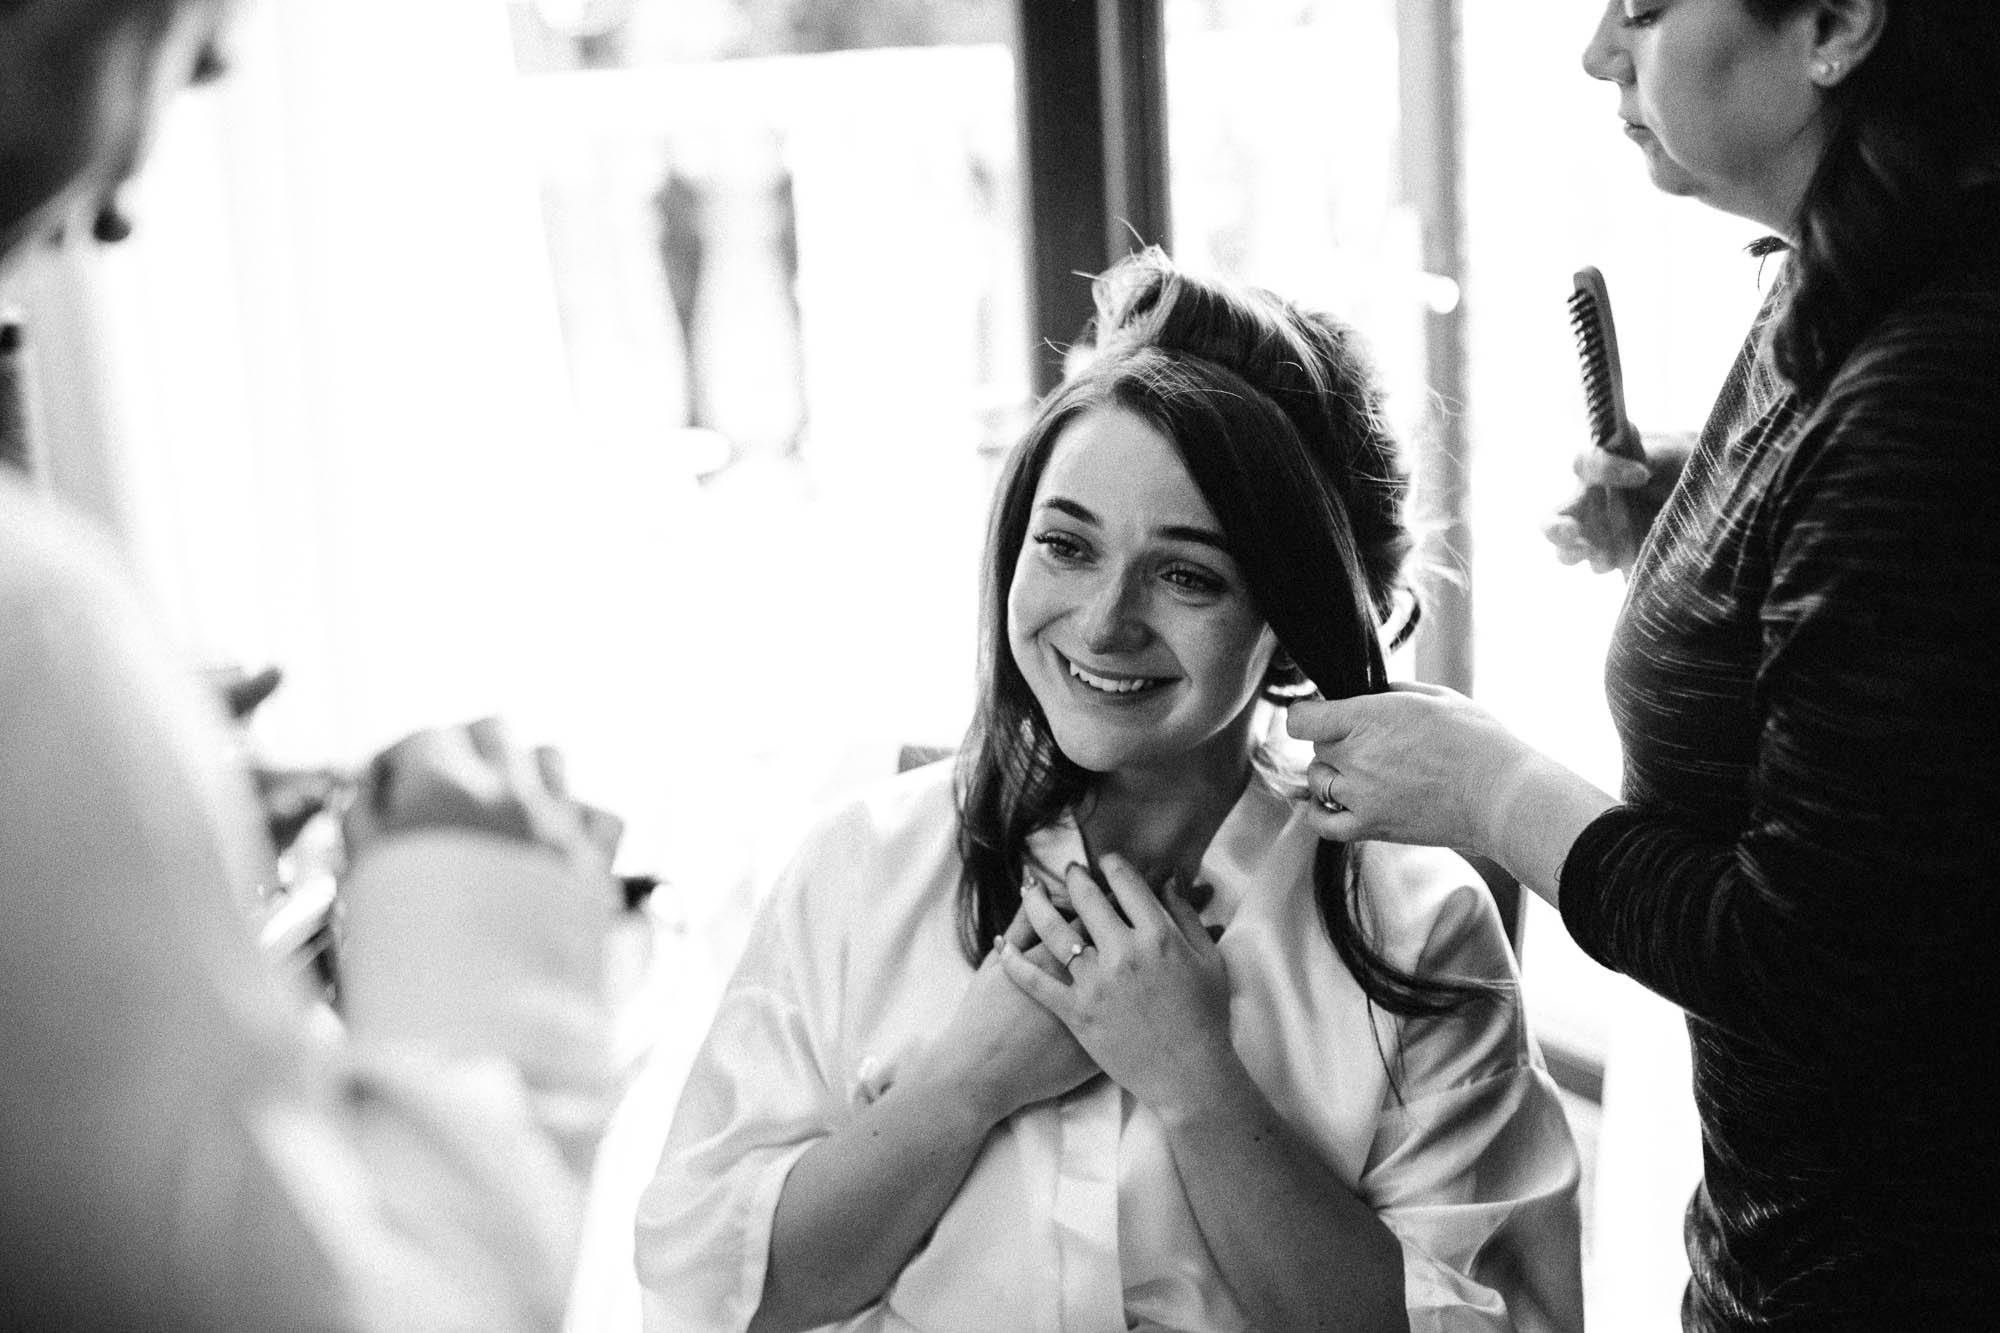 Bride having her hair done during bridal preparations and looking emotional